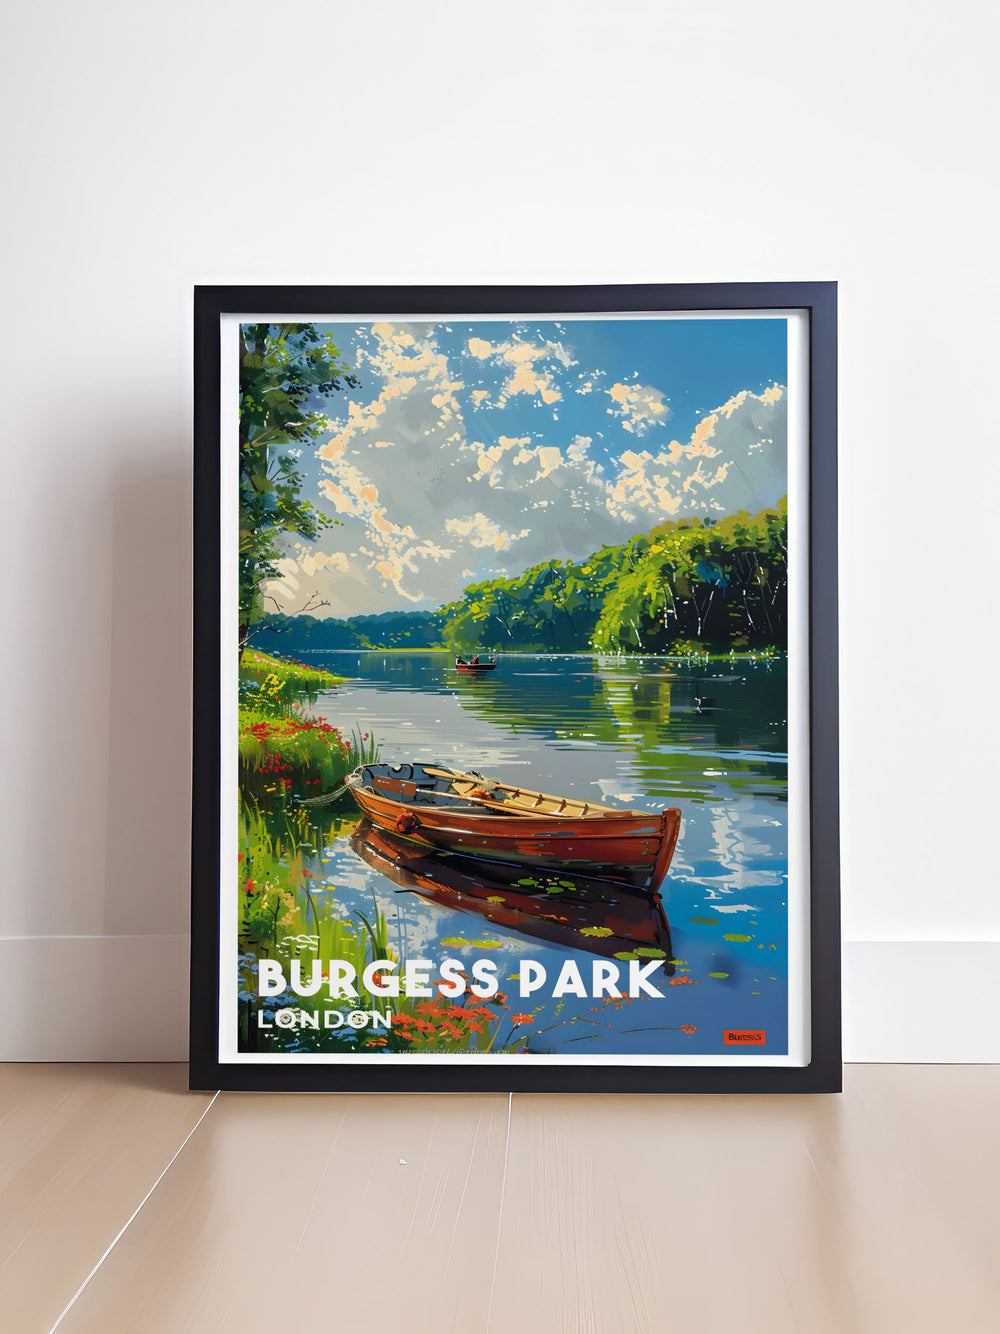 Beautiful home decor piece featuring Burgess Park Lake in London. The vibrant colors and detailed imagery bring the tranquility and charm of this urban park into your living space, making it a perfect addition to any art collection.